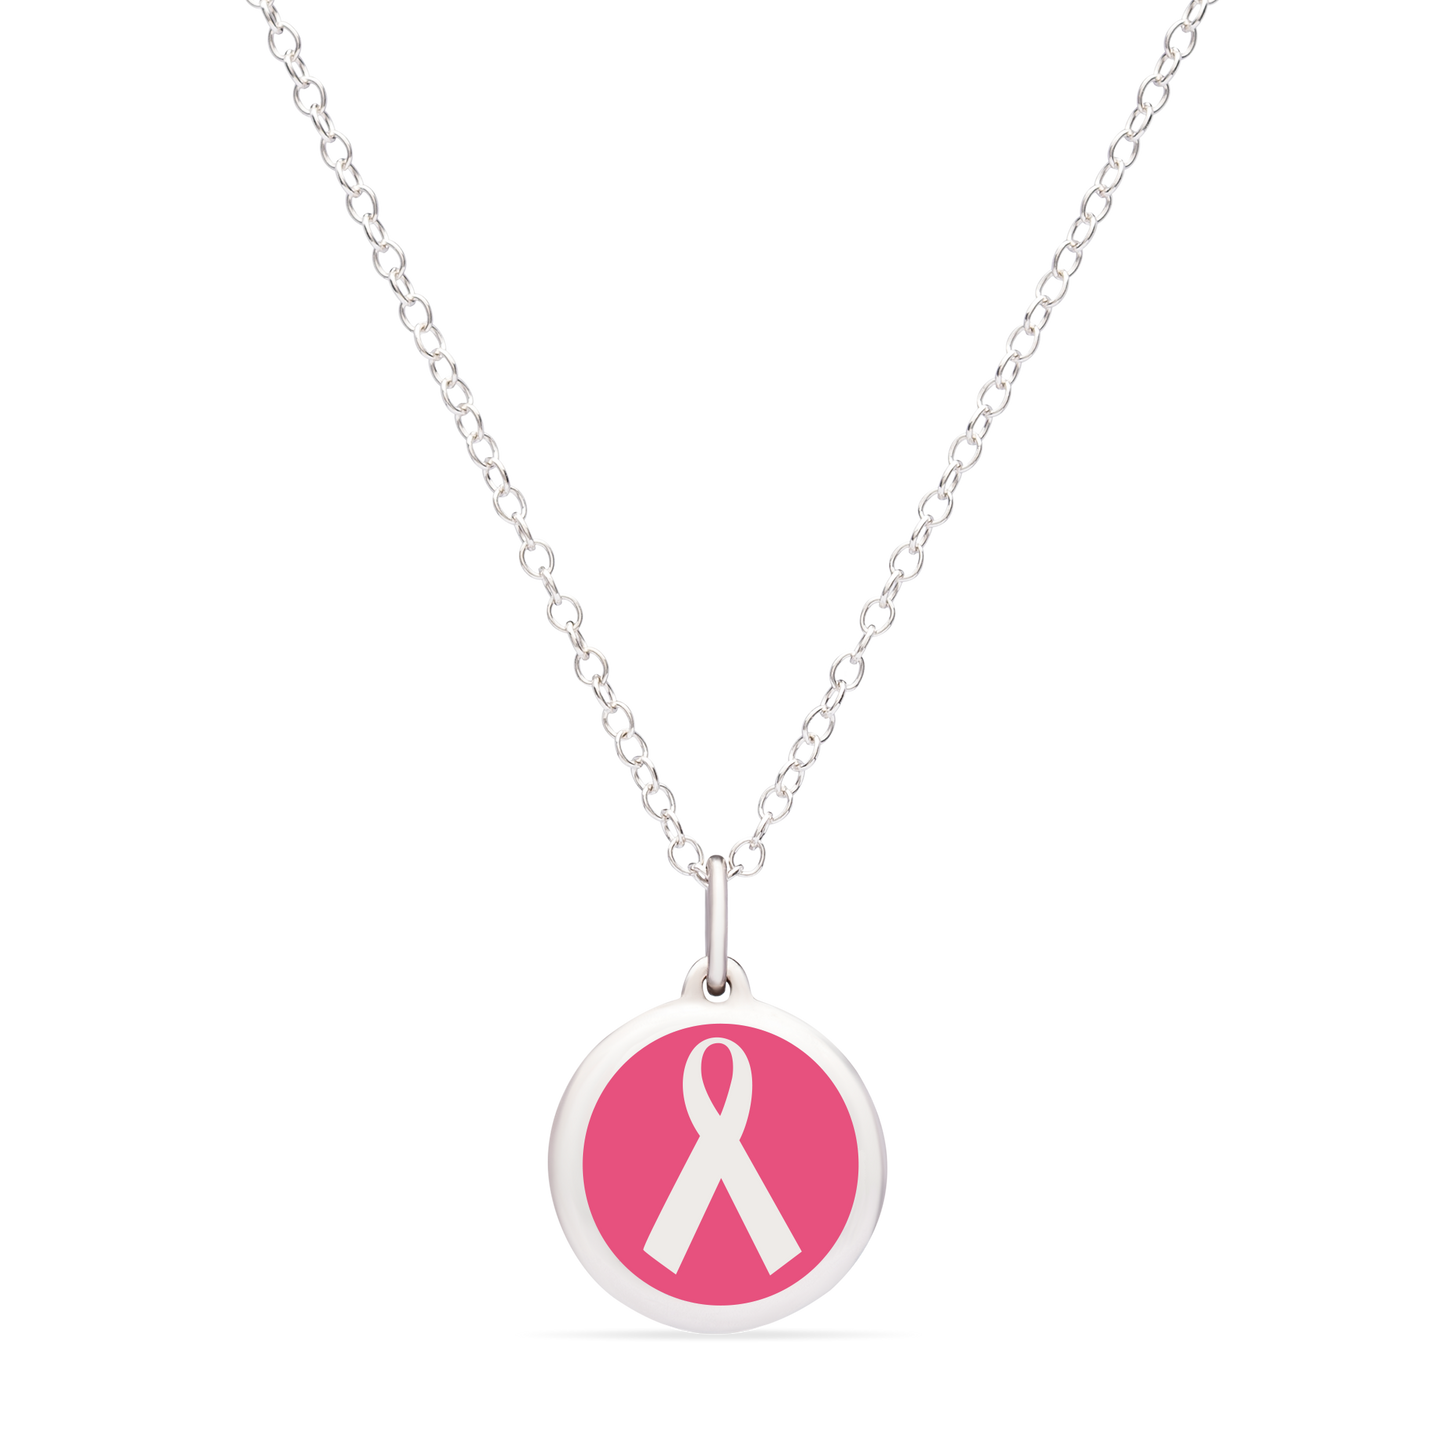 MINI PINK RIBBON CHARM sterling silver with rhodium plate